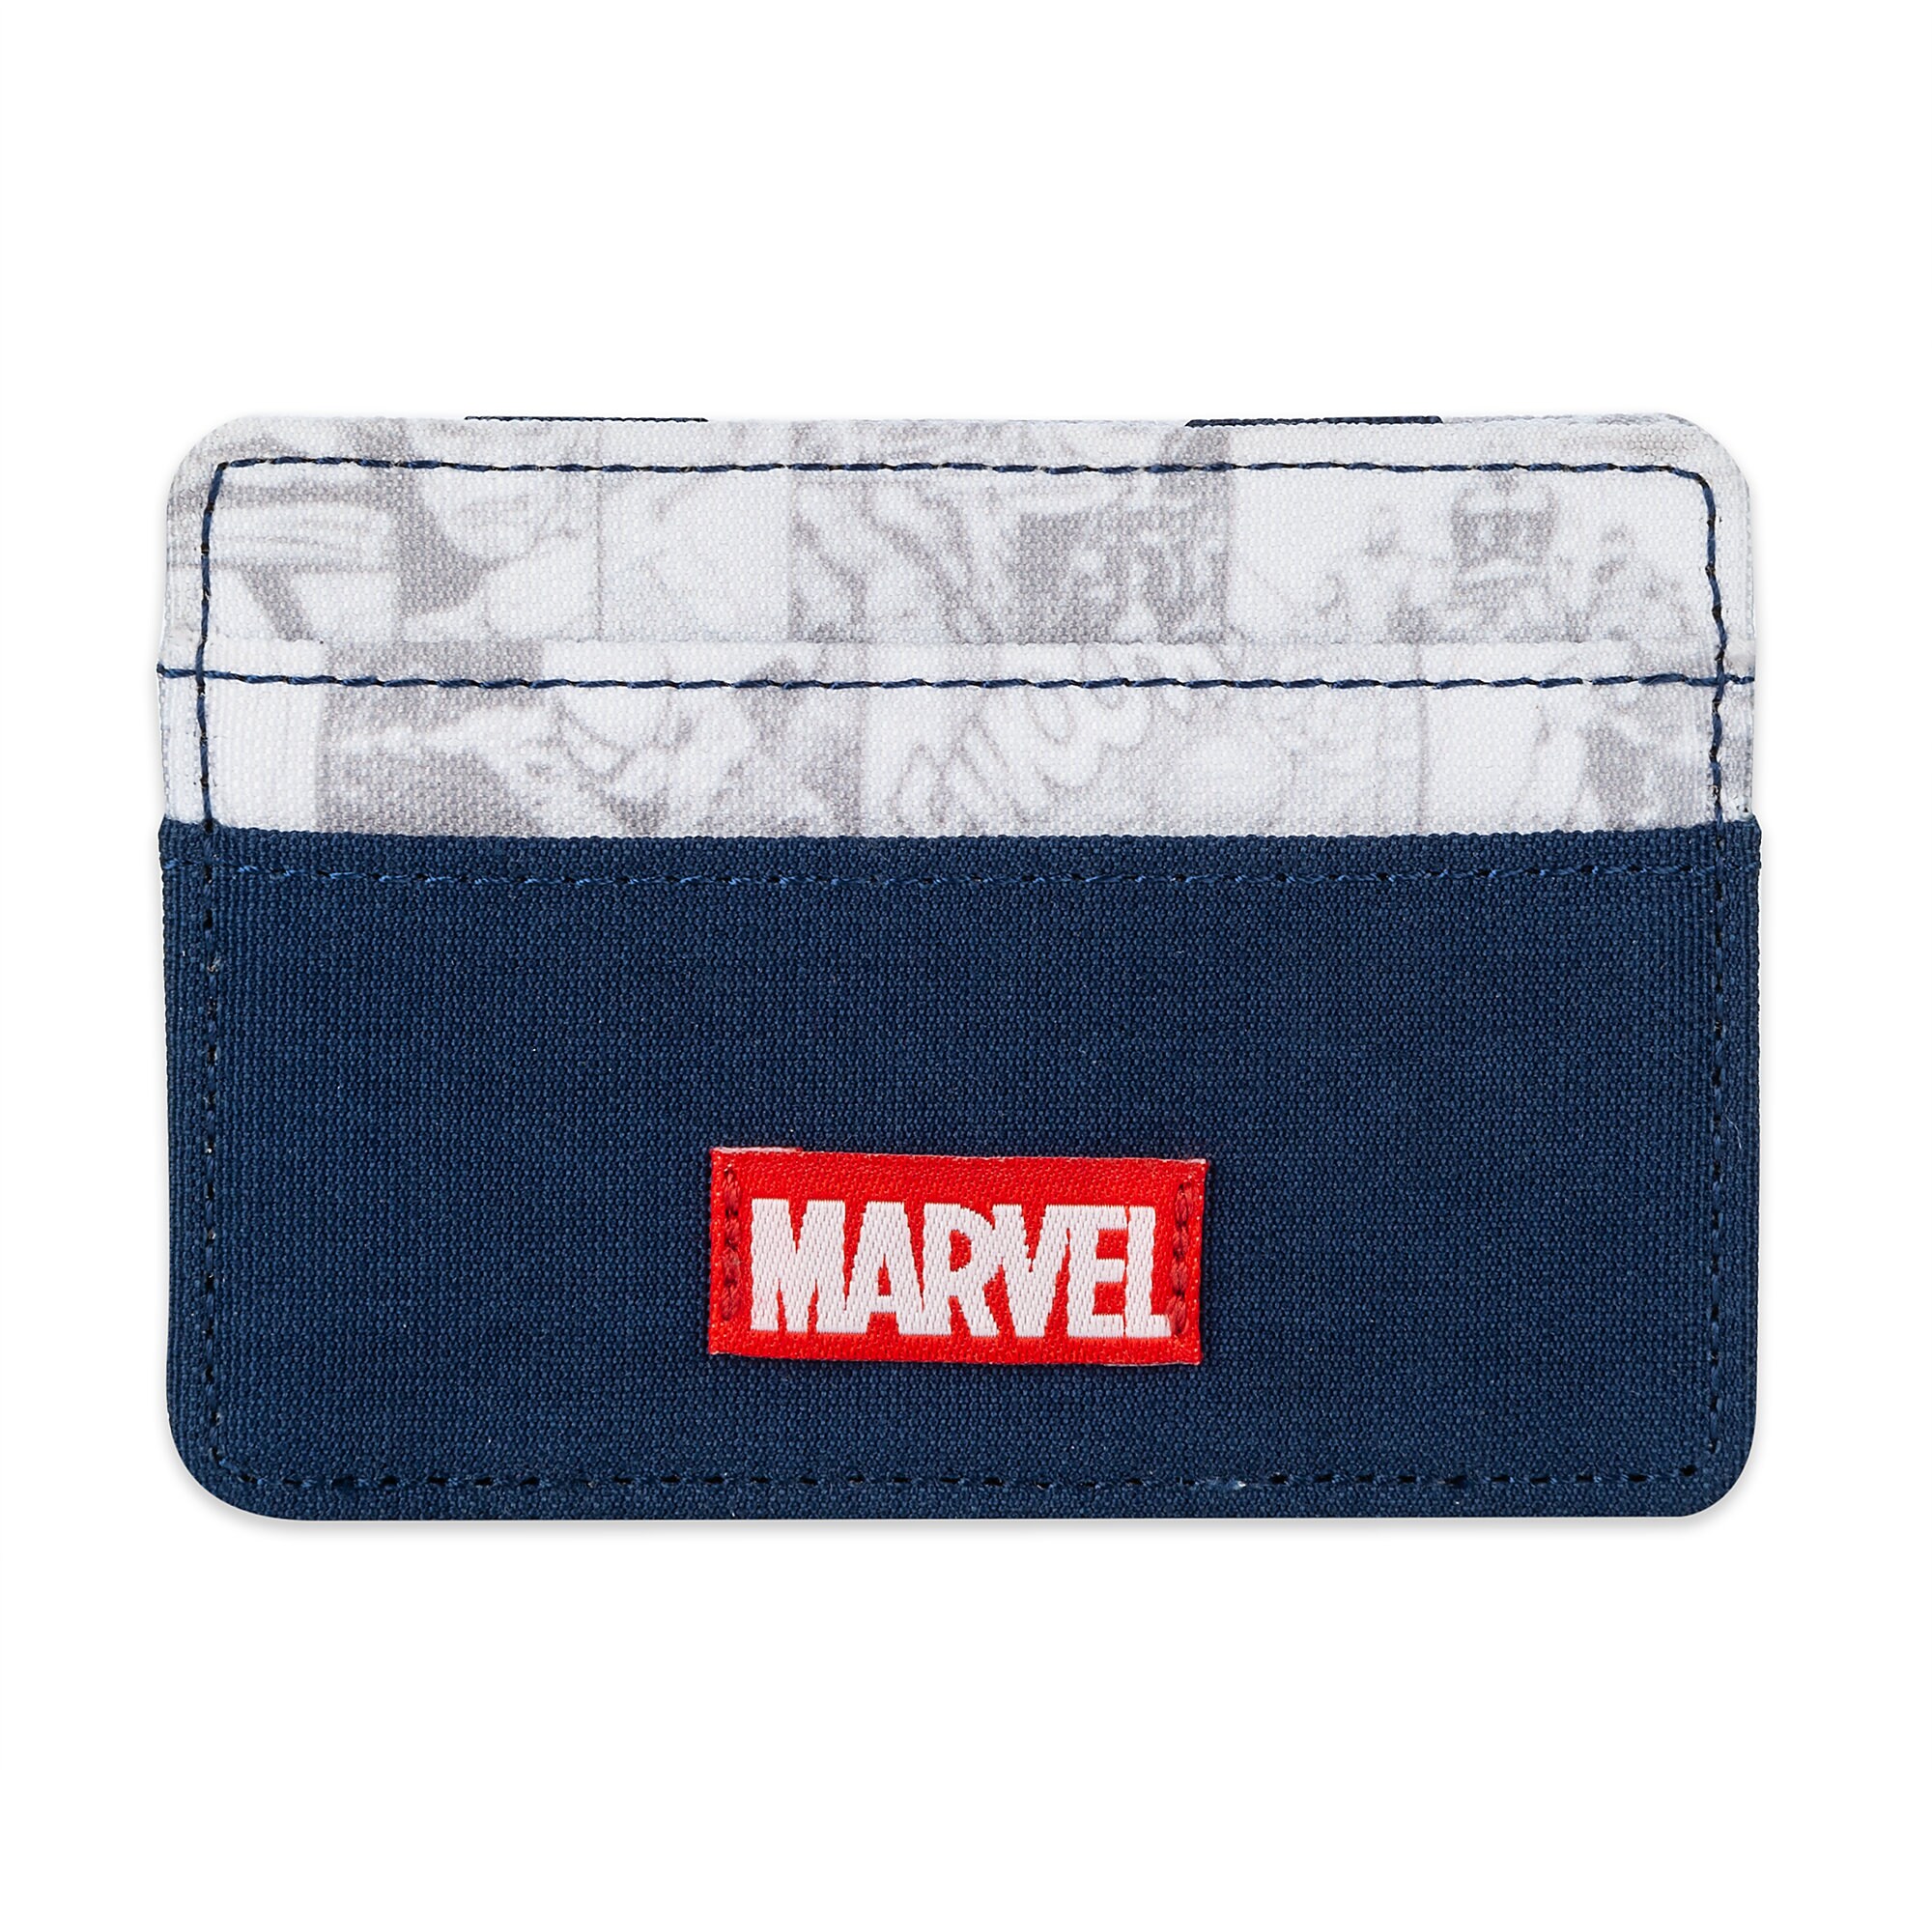 Marvel Magic Wallet is now available Dis Merchandise News